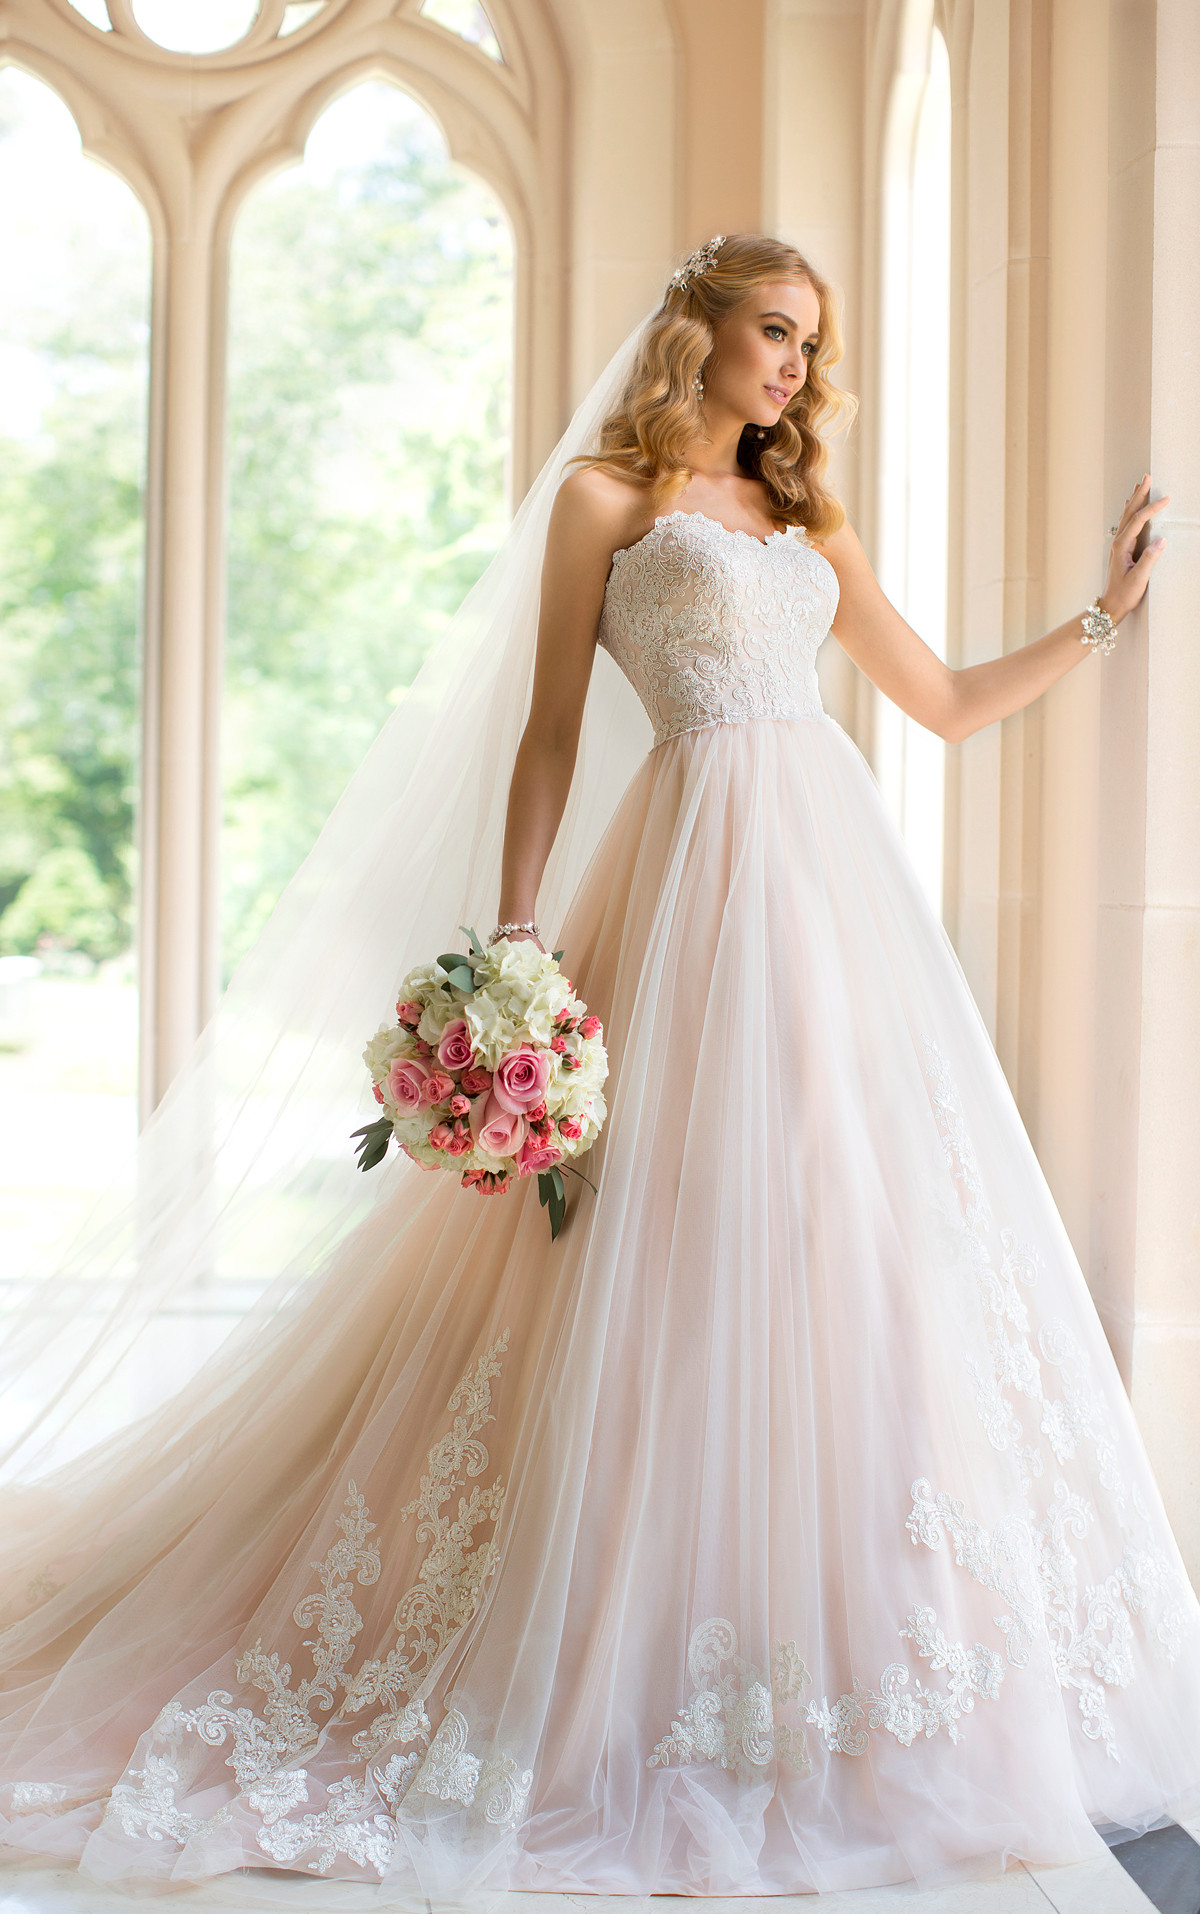 Designer Wedding Dresses
 The Best Gowns from The Most In Demand Wedding Dress